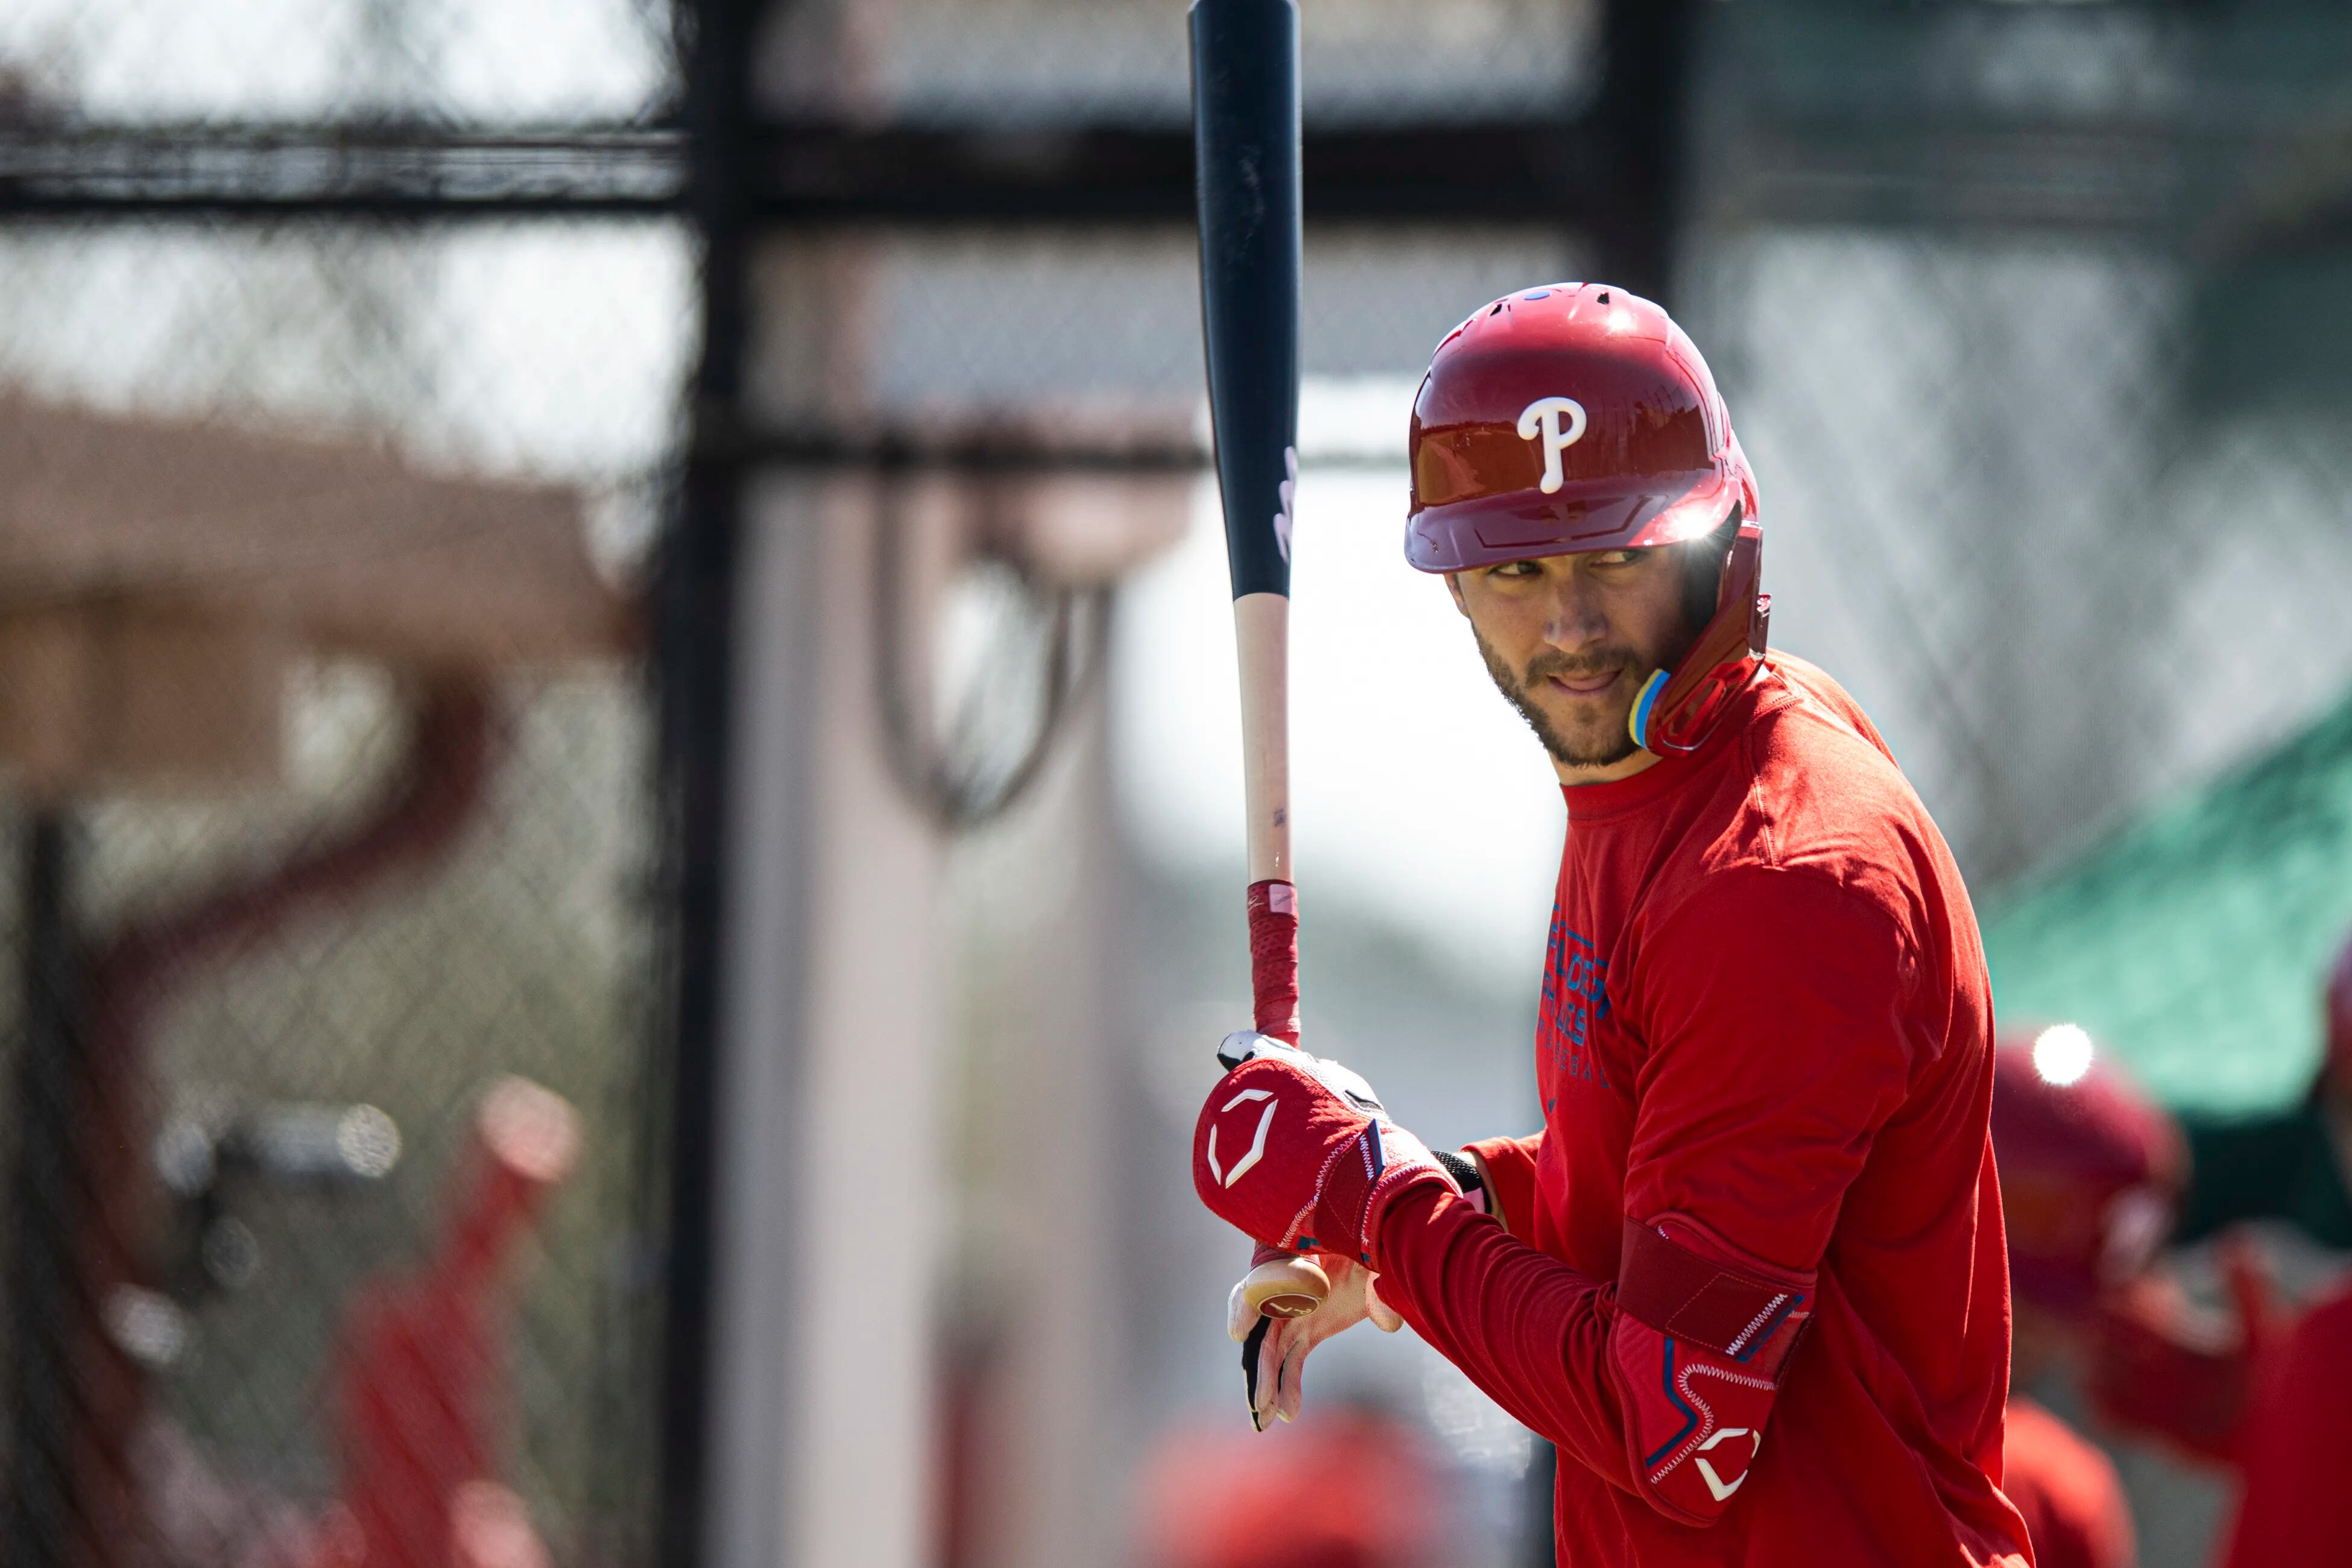 See photos from Tuesday's Phillies spring training workout